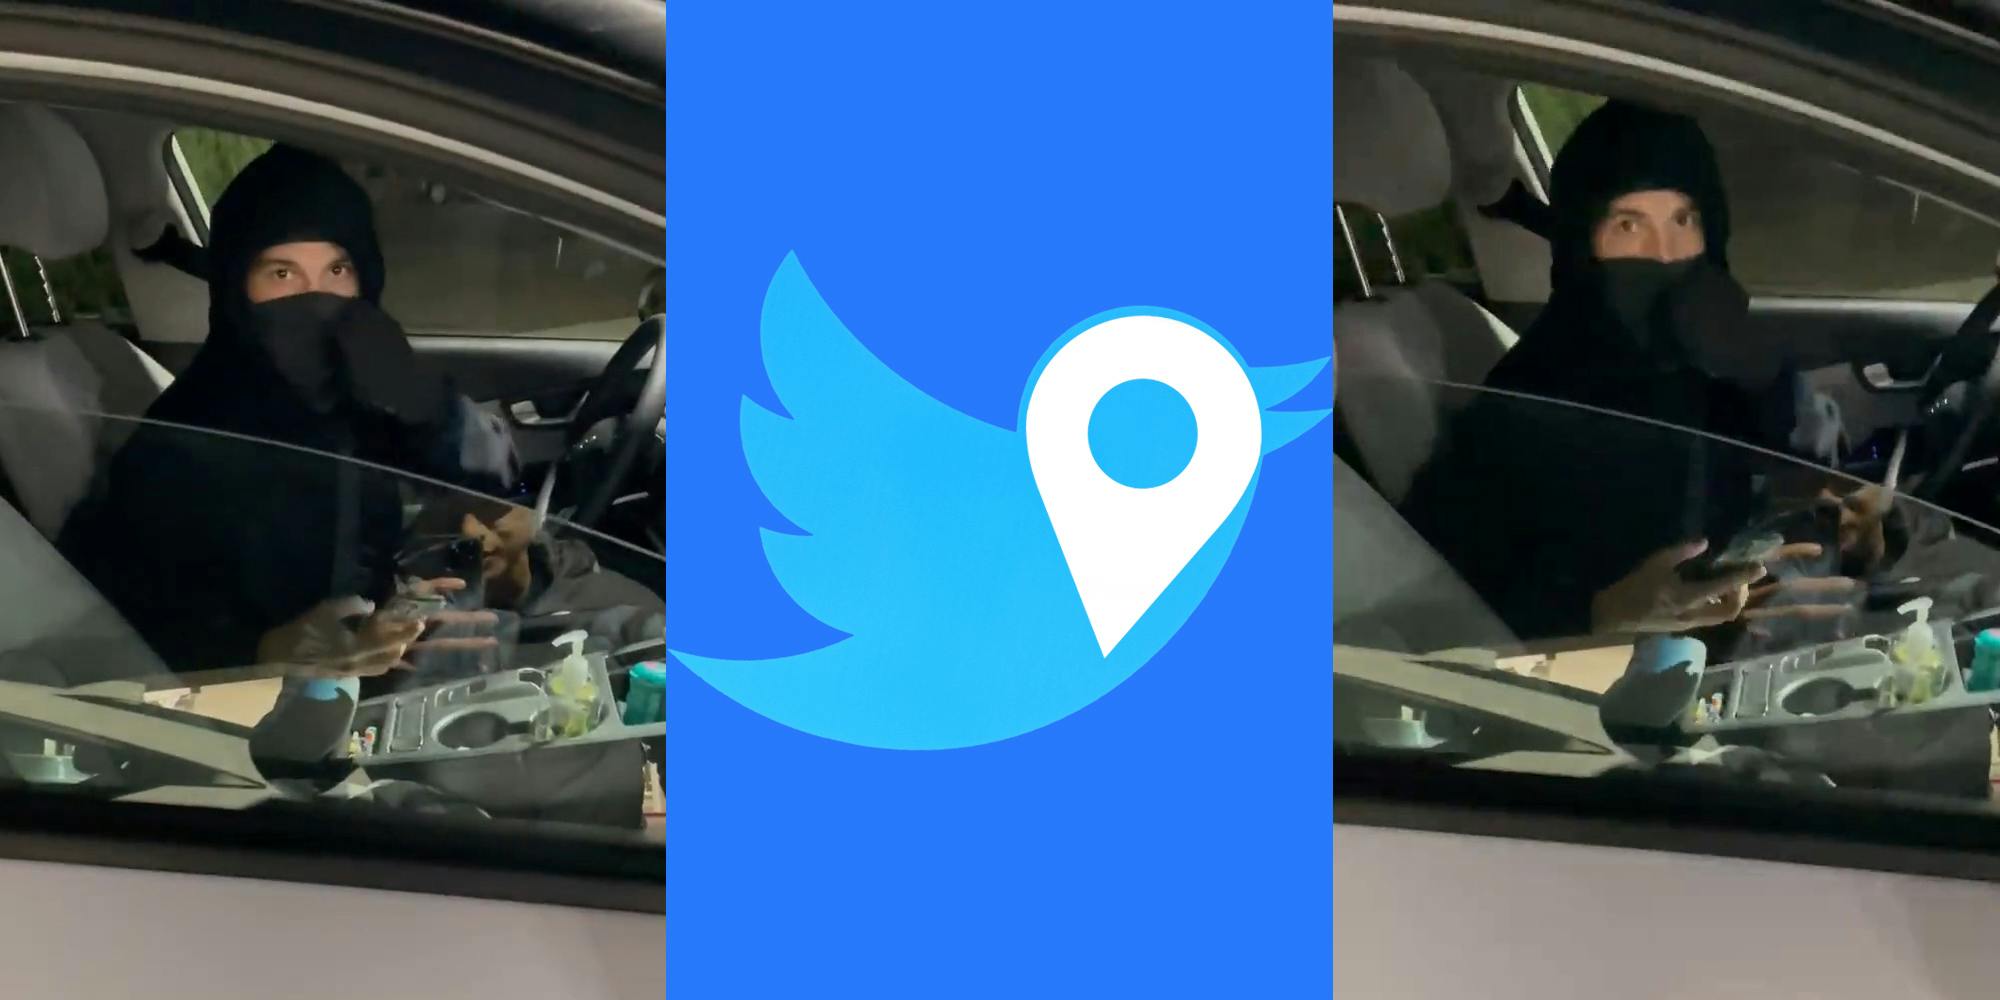 man in car holding phone (l) Twitter bird with location ping symbol on blue background (c) man in car holding phone (r)